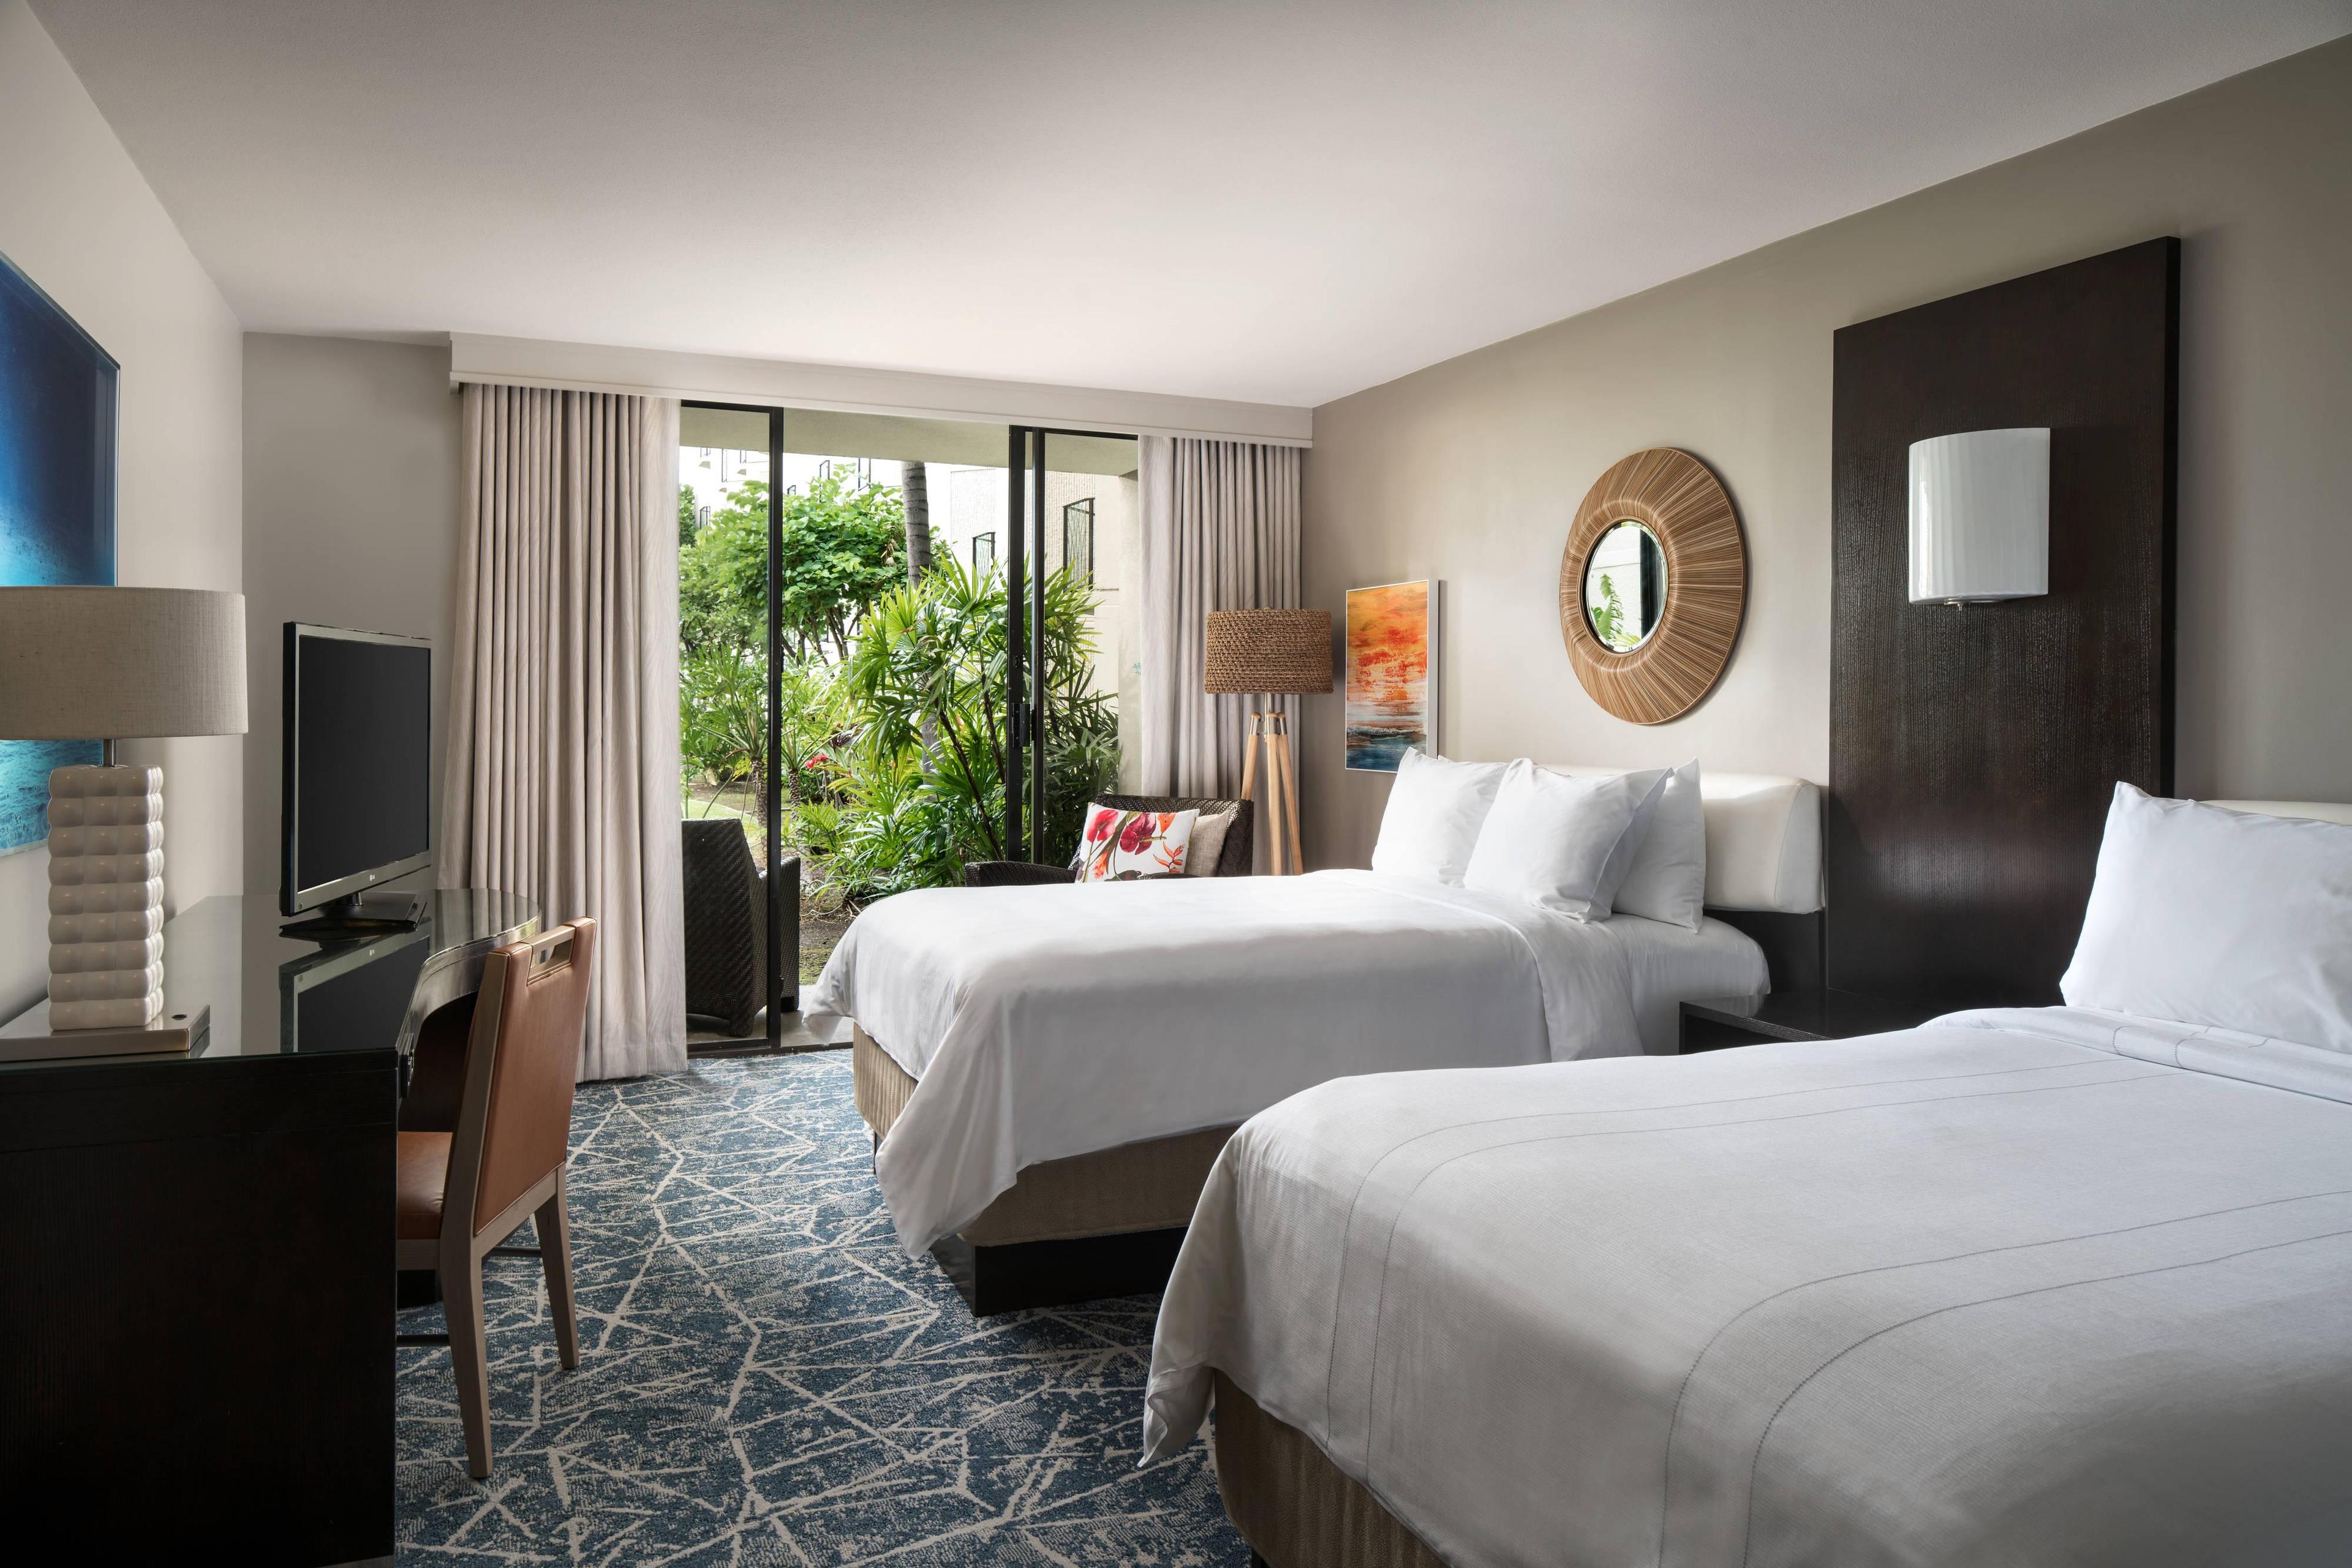 Our Garden View Guest Room offers two double beds and a patio for relaxing or entertaining.